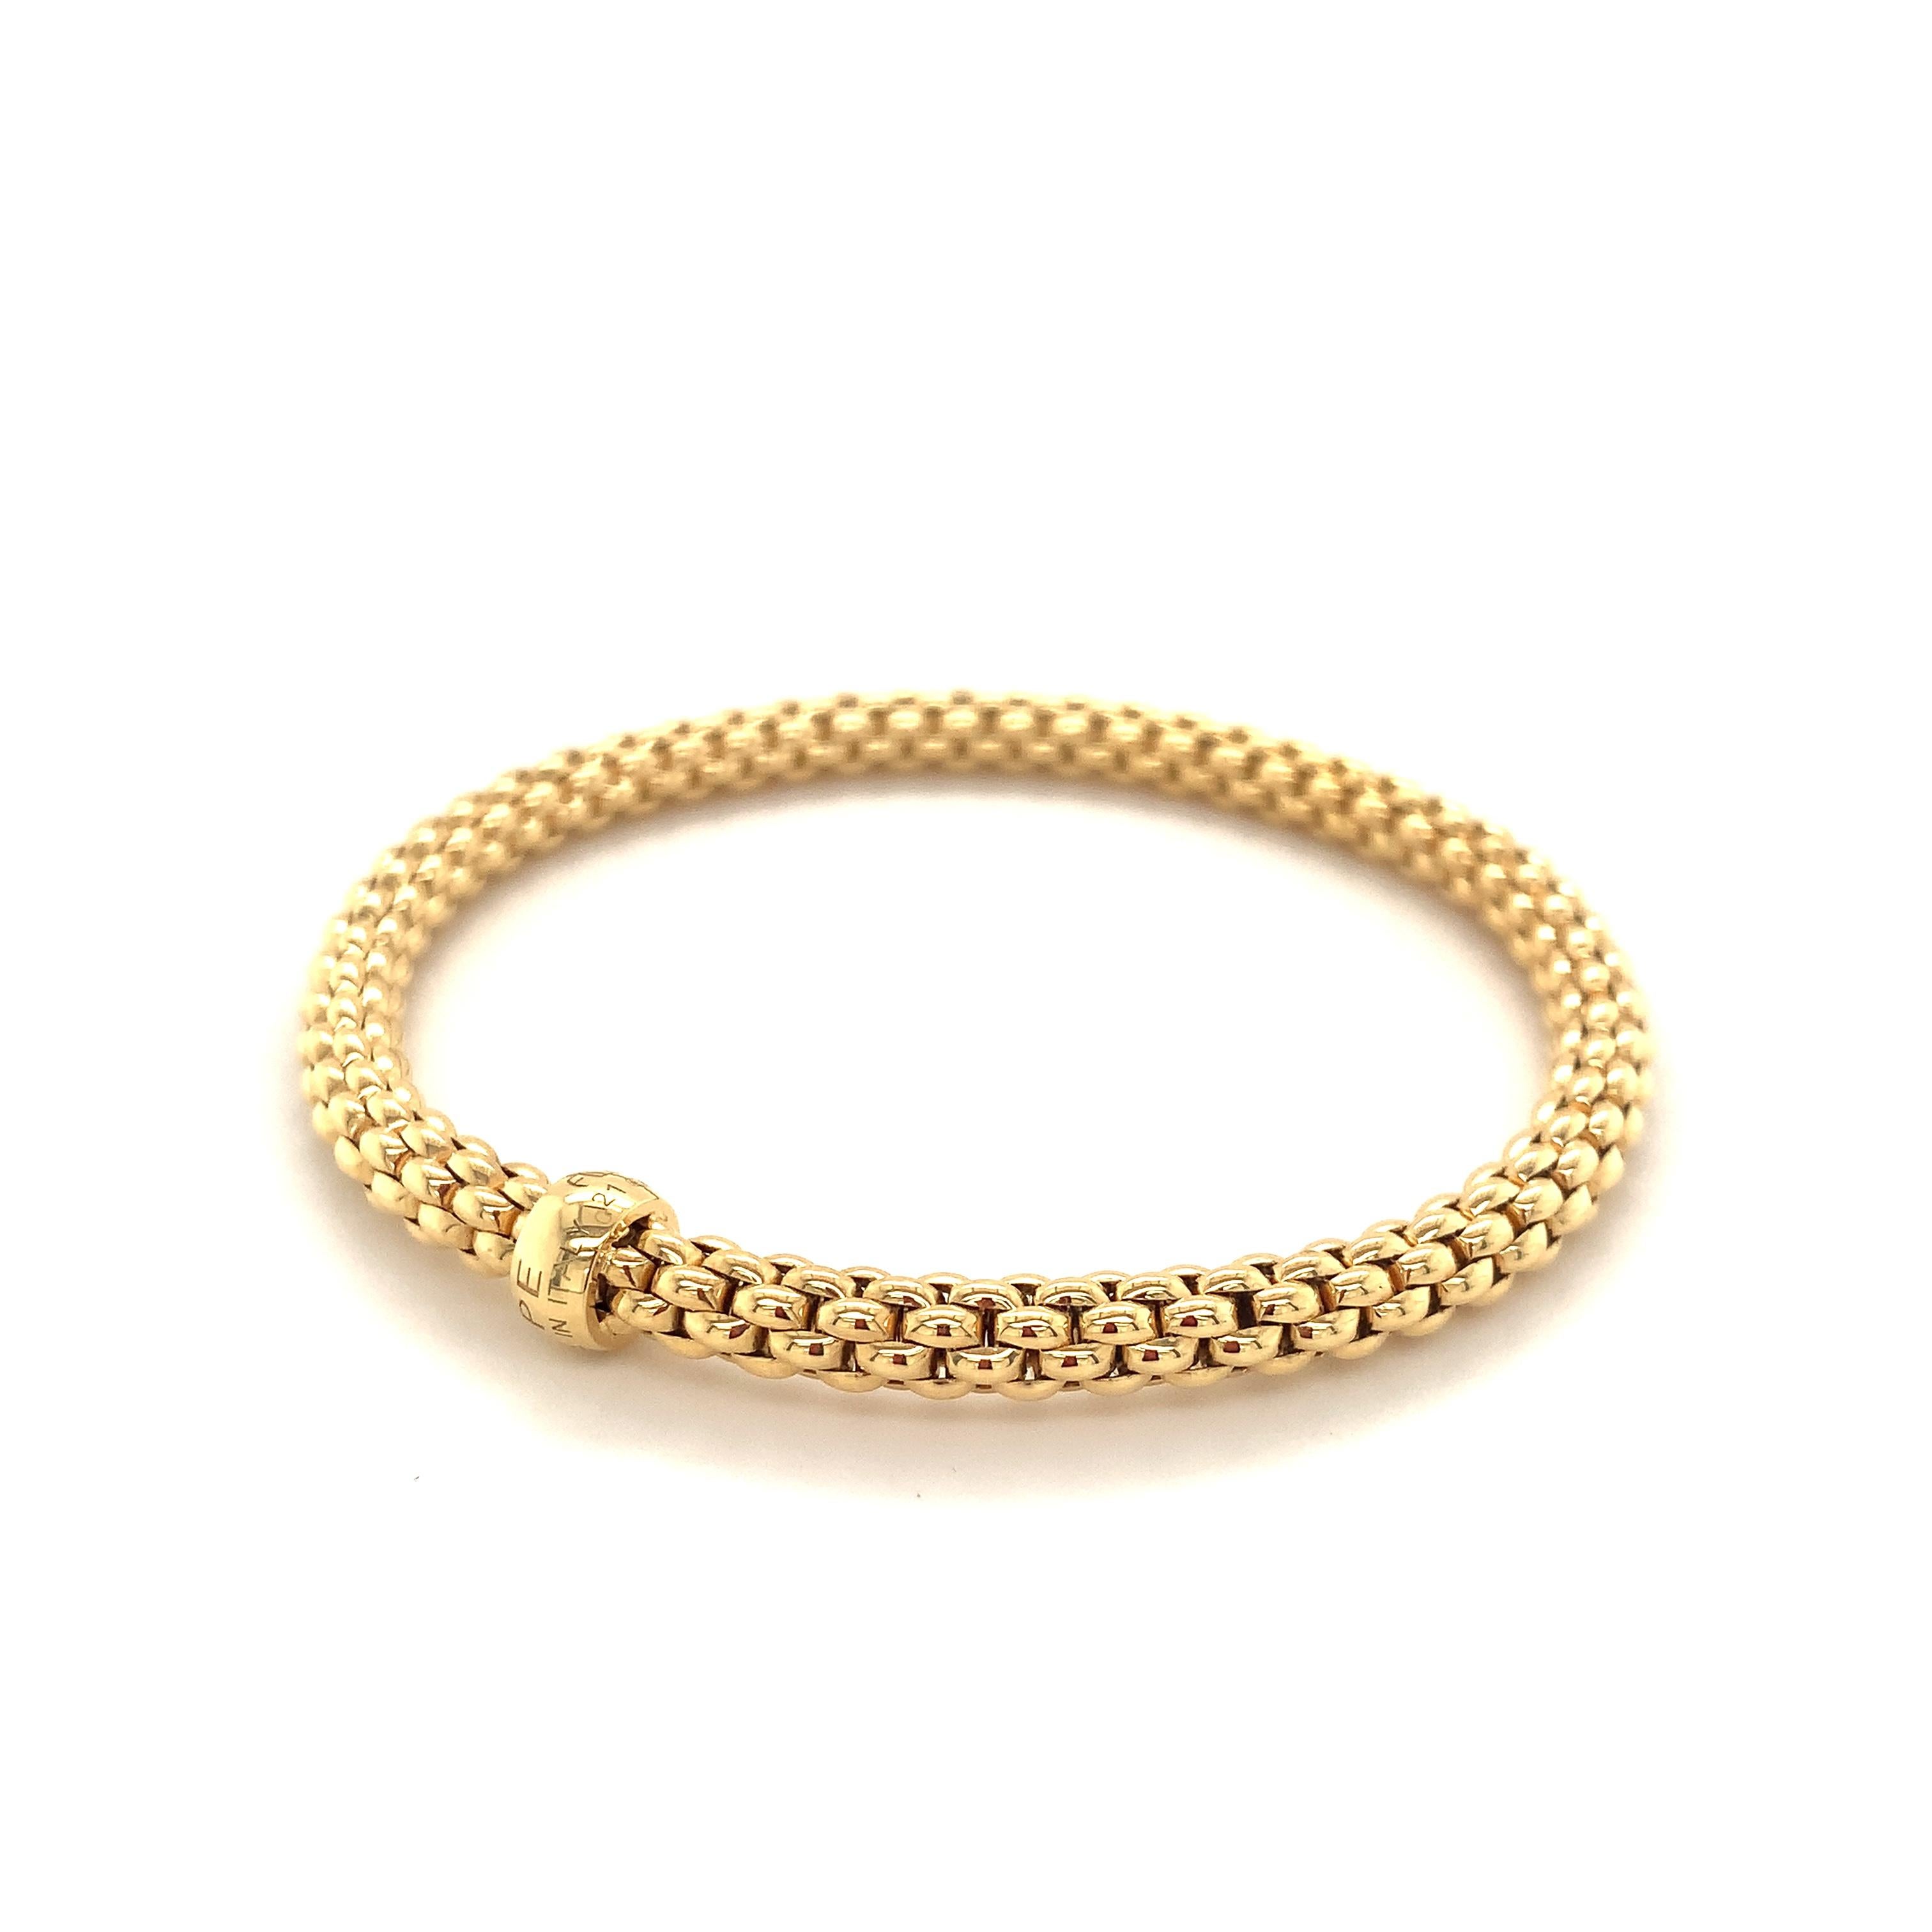 Fope Bracelet 18K Yellow Gold with Solid Gold Rondel 620BM-G 4